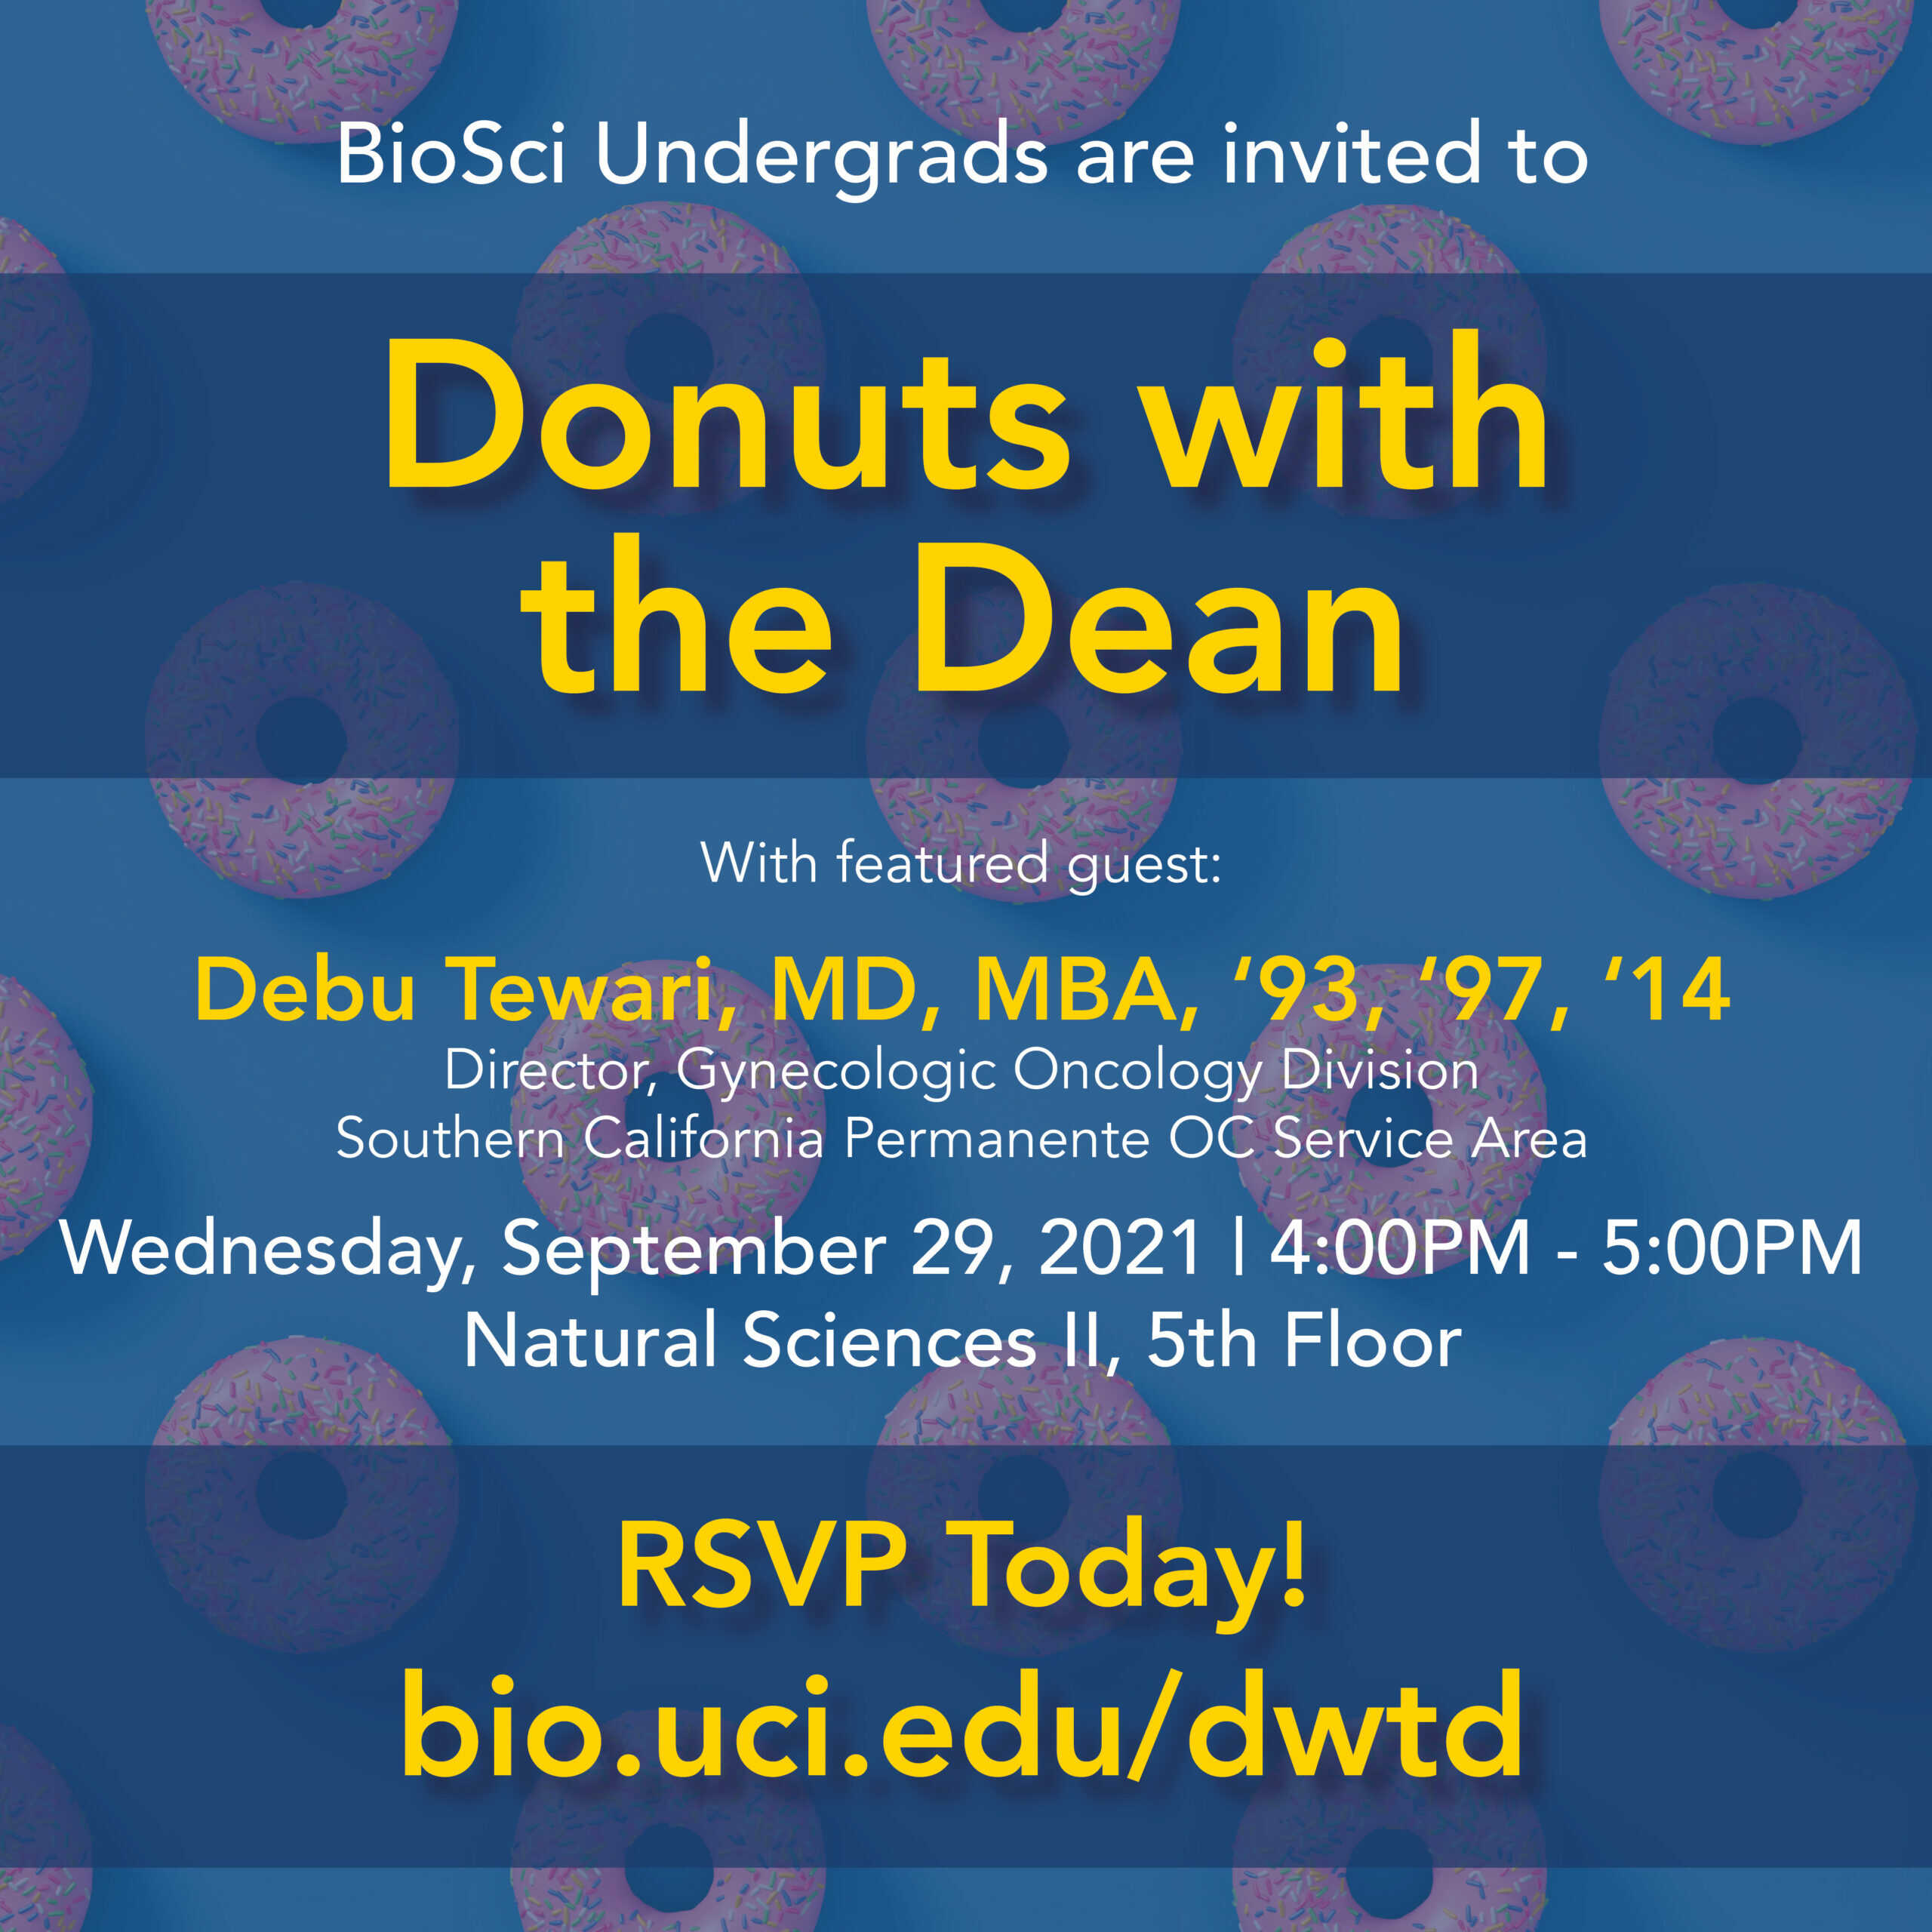 Invitation to Donuts with the Dean event. Donuts in the background, Date, Location and Time listed as well.